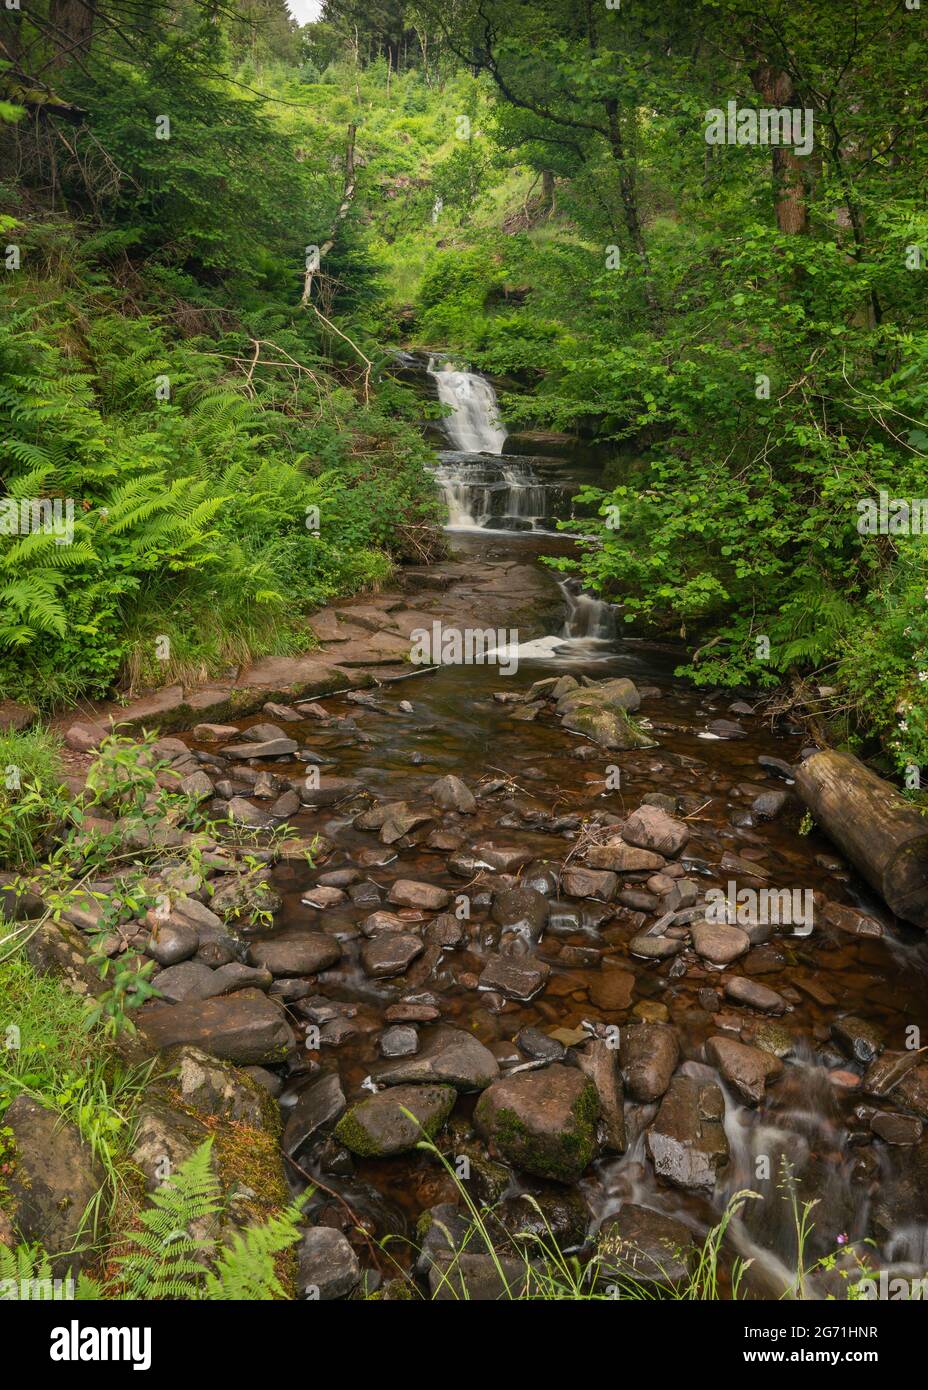 Natural beautiful waterfalls taken with long exposure to make the water silky smooth in the Brecon Beacons national park. Stock Photo